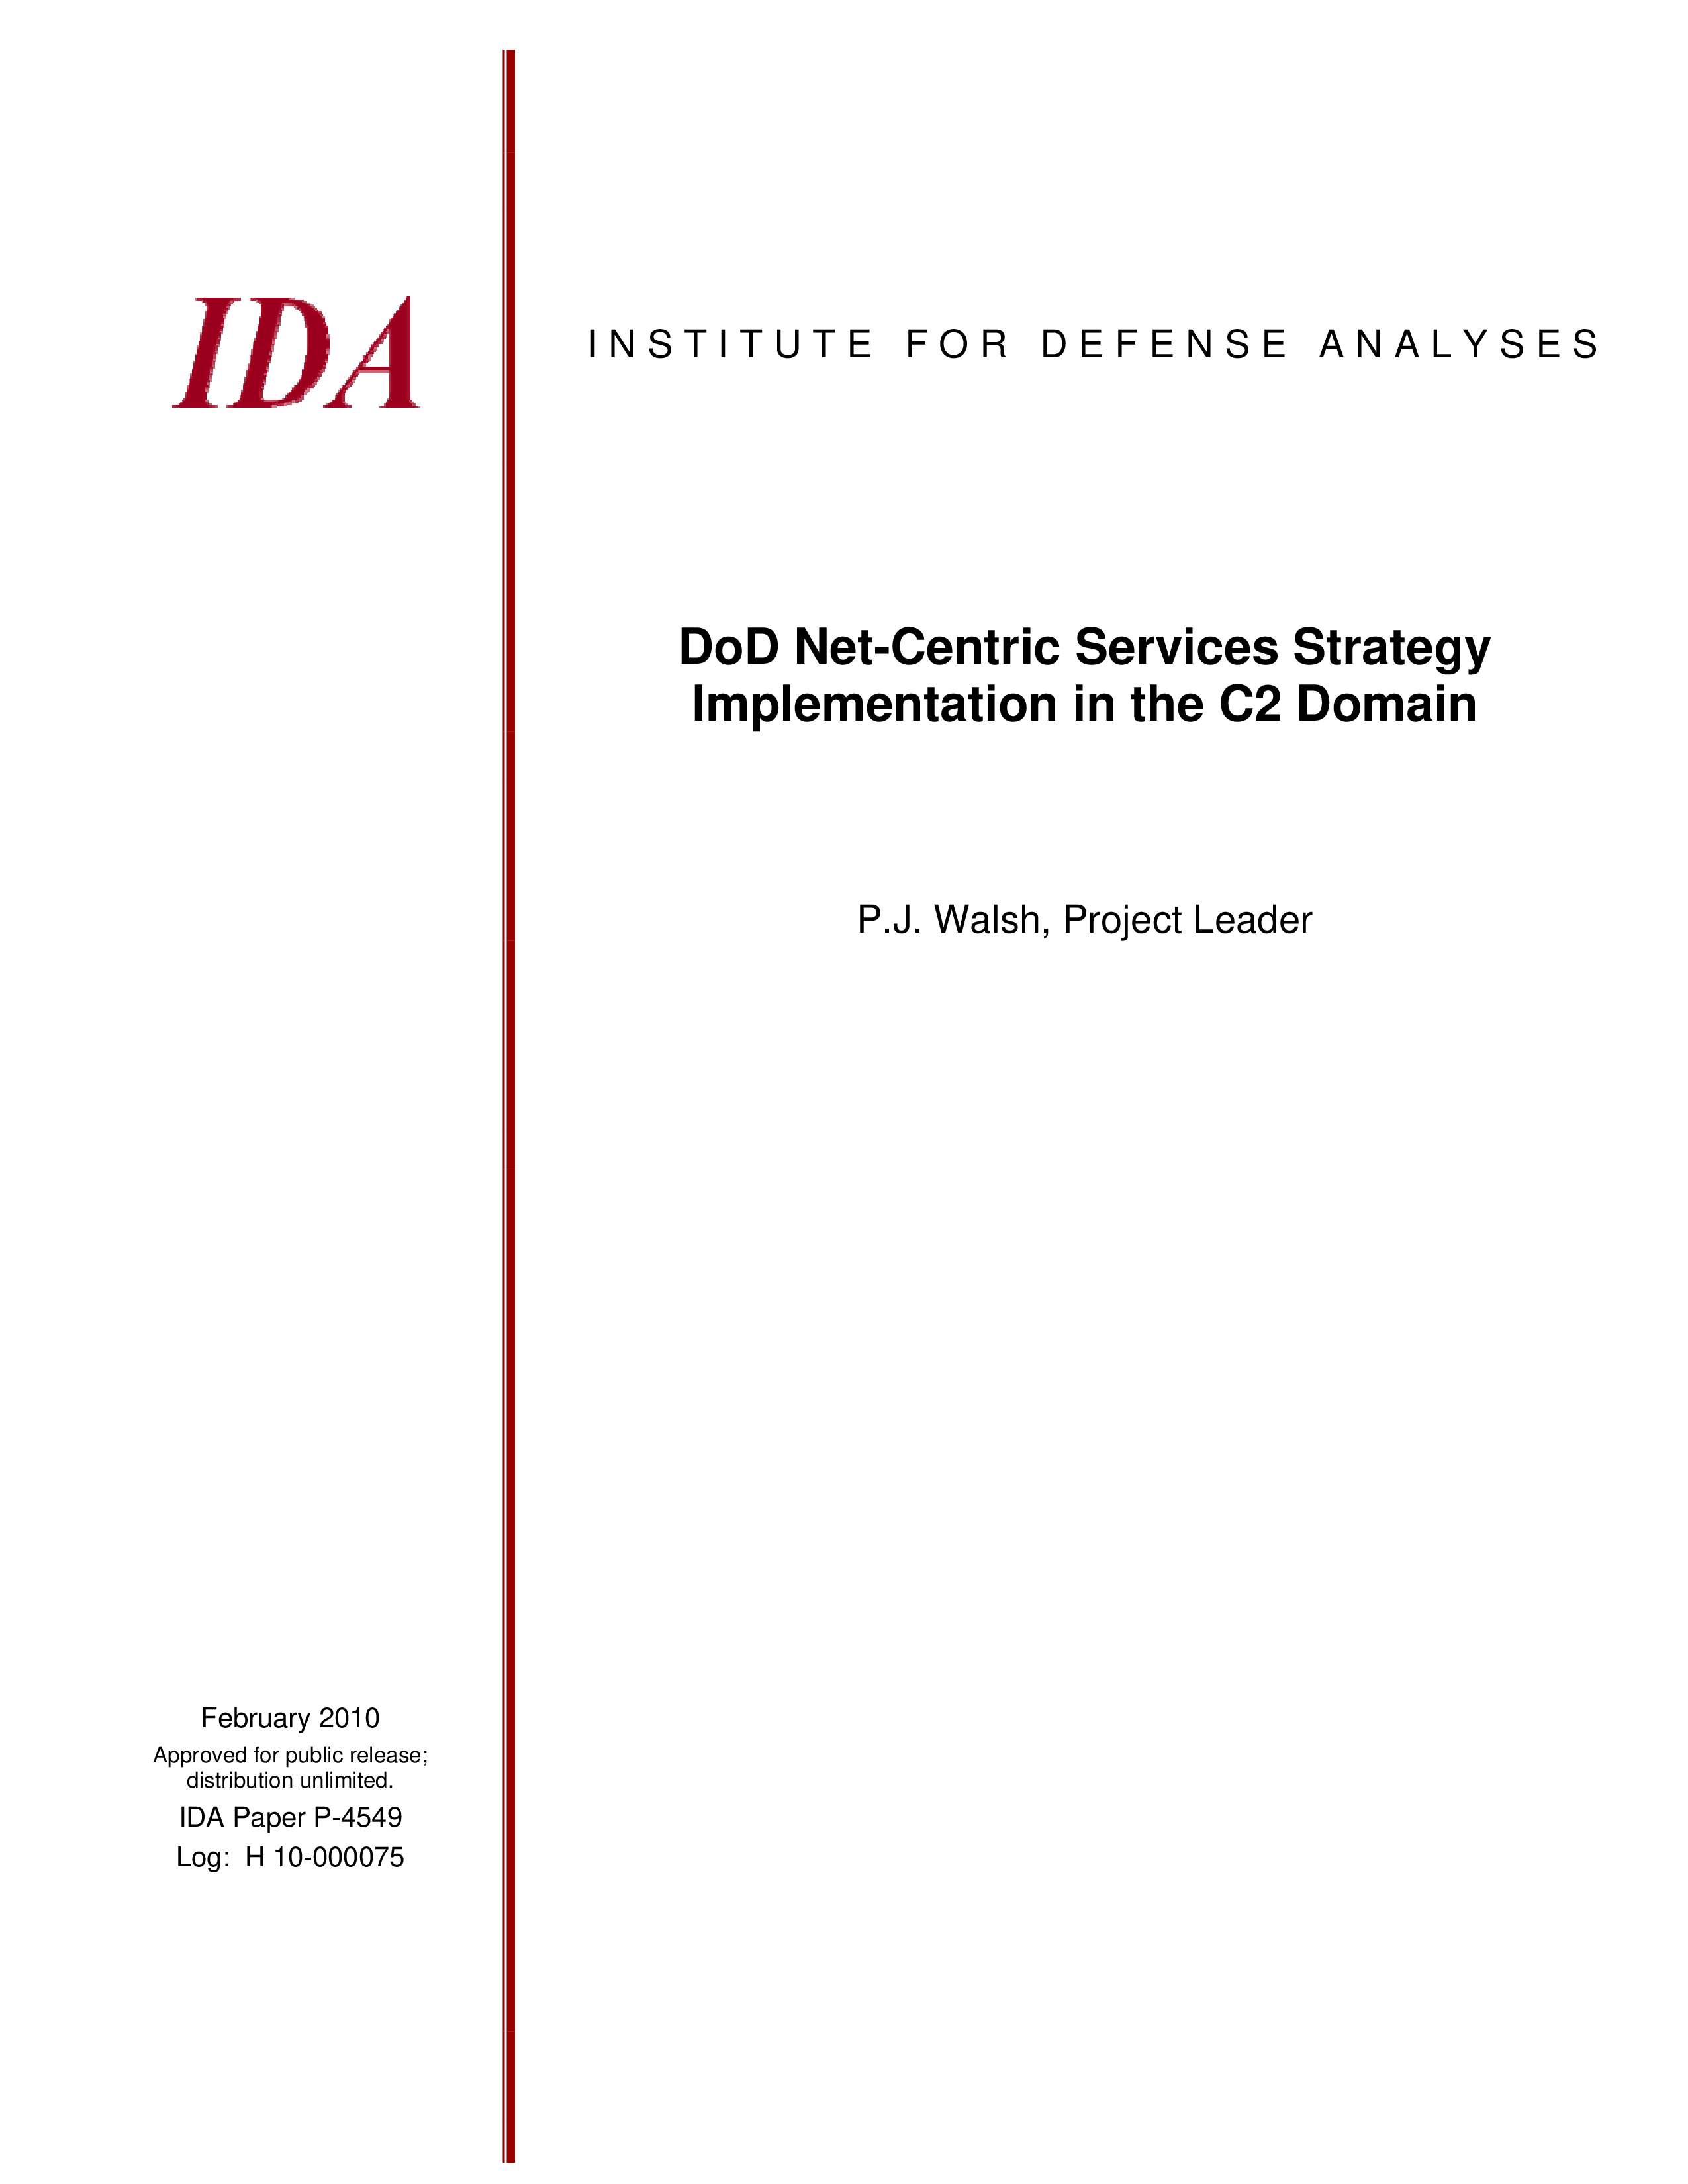 DoD Net-Centric Services Strategy Implementation in the C2 Domain